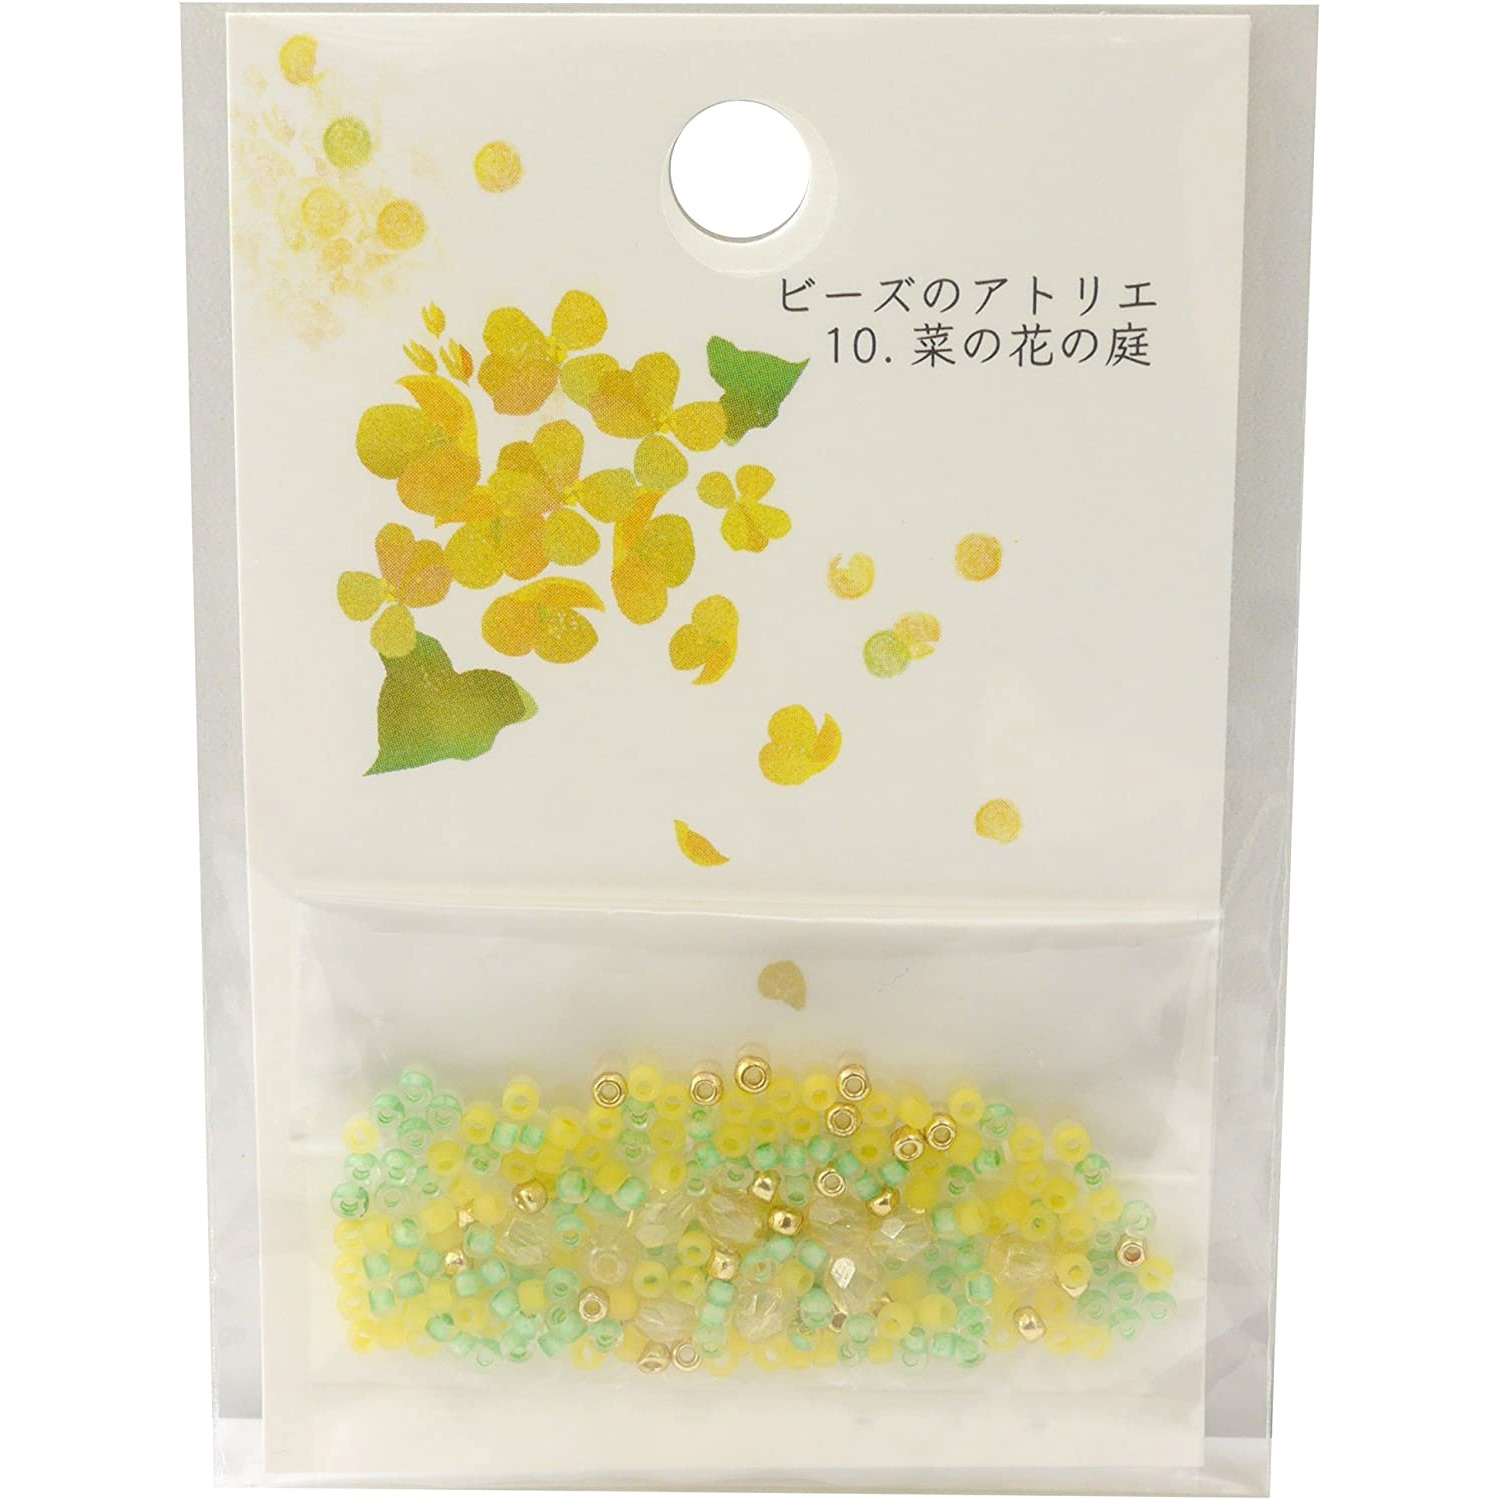 [Order upon demand, not returnable]■TOH398474 ビーズパック10 菜の花の庭 5パック (セット)